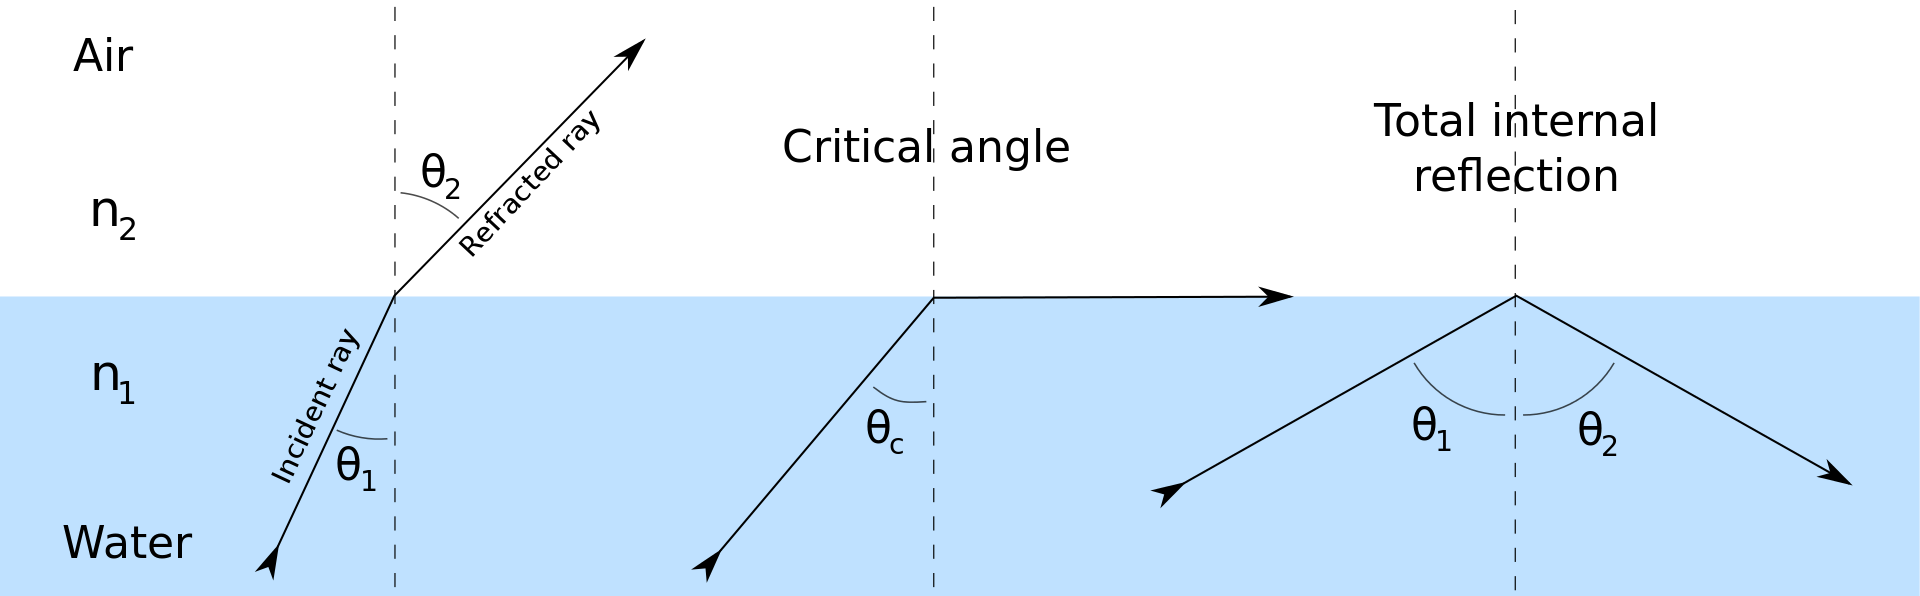 refraction and diffraction similarities